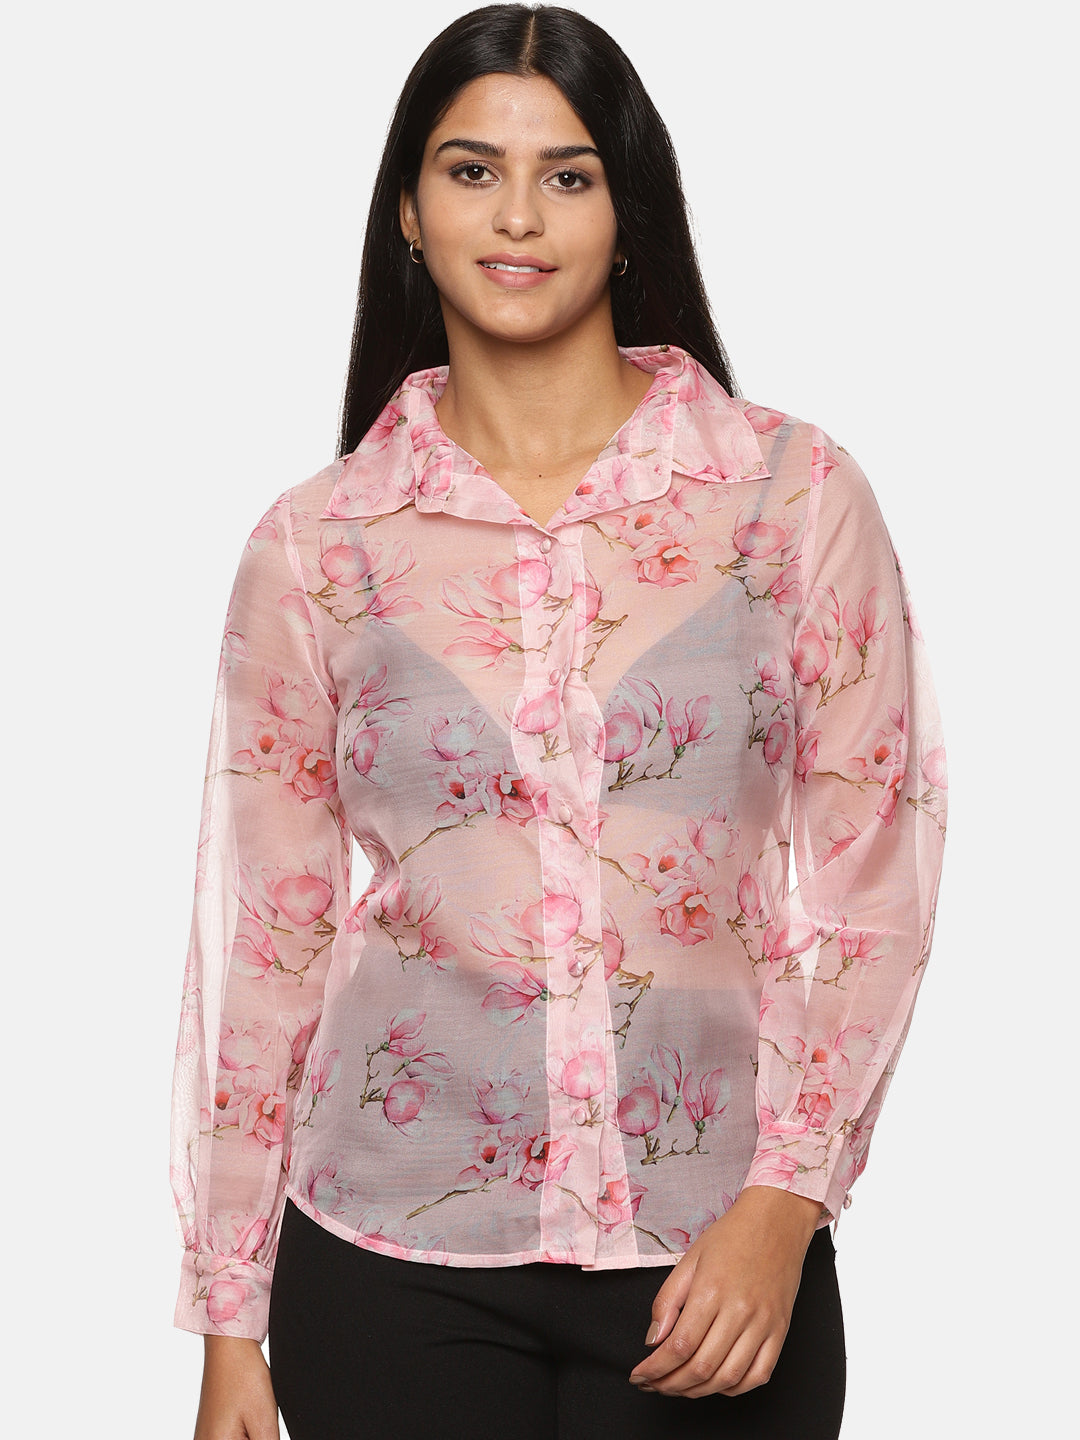 Pink Floral Printed Blouse  Buy women tops and shirts online in Lagos